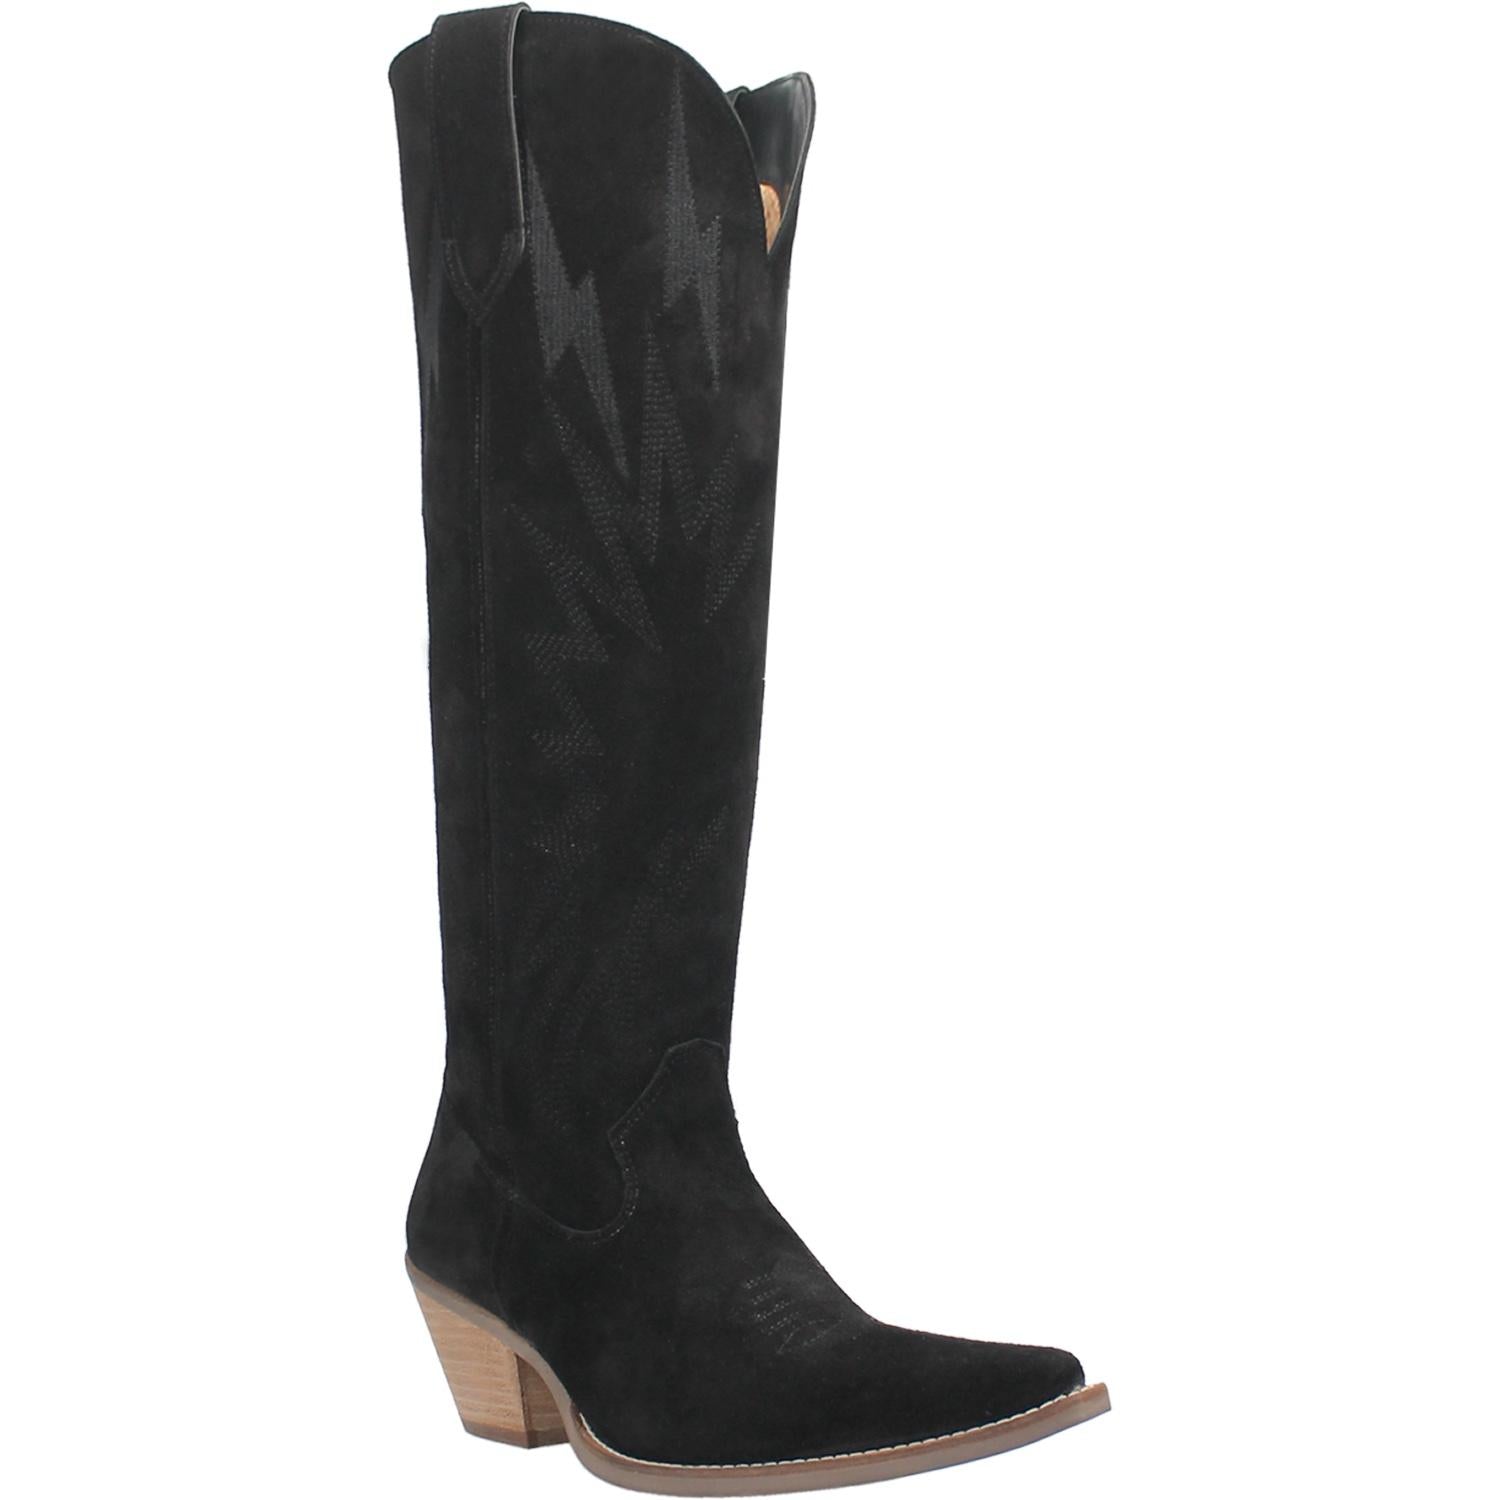 A tall black boot featuring rhinestone lightning designs, small heel, leather straps, and a V cut at the top. Item is pictured on a plain white background